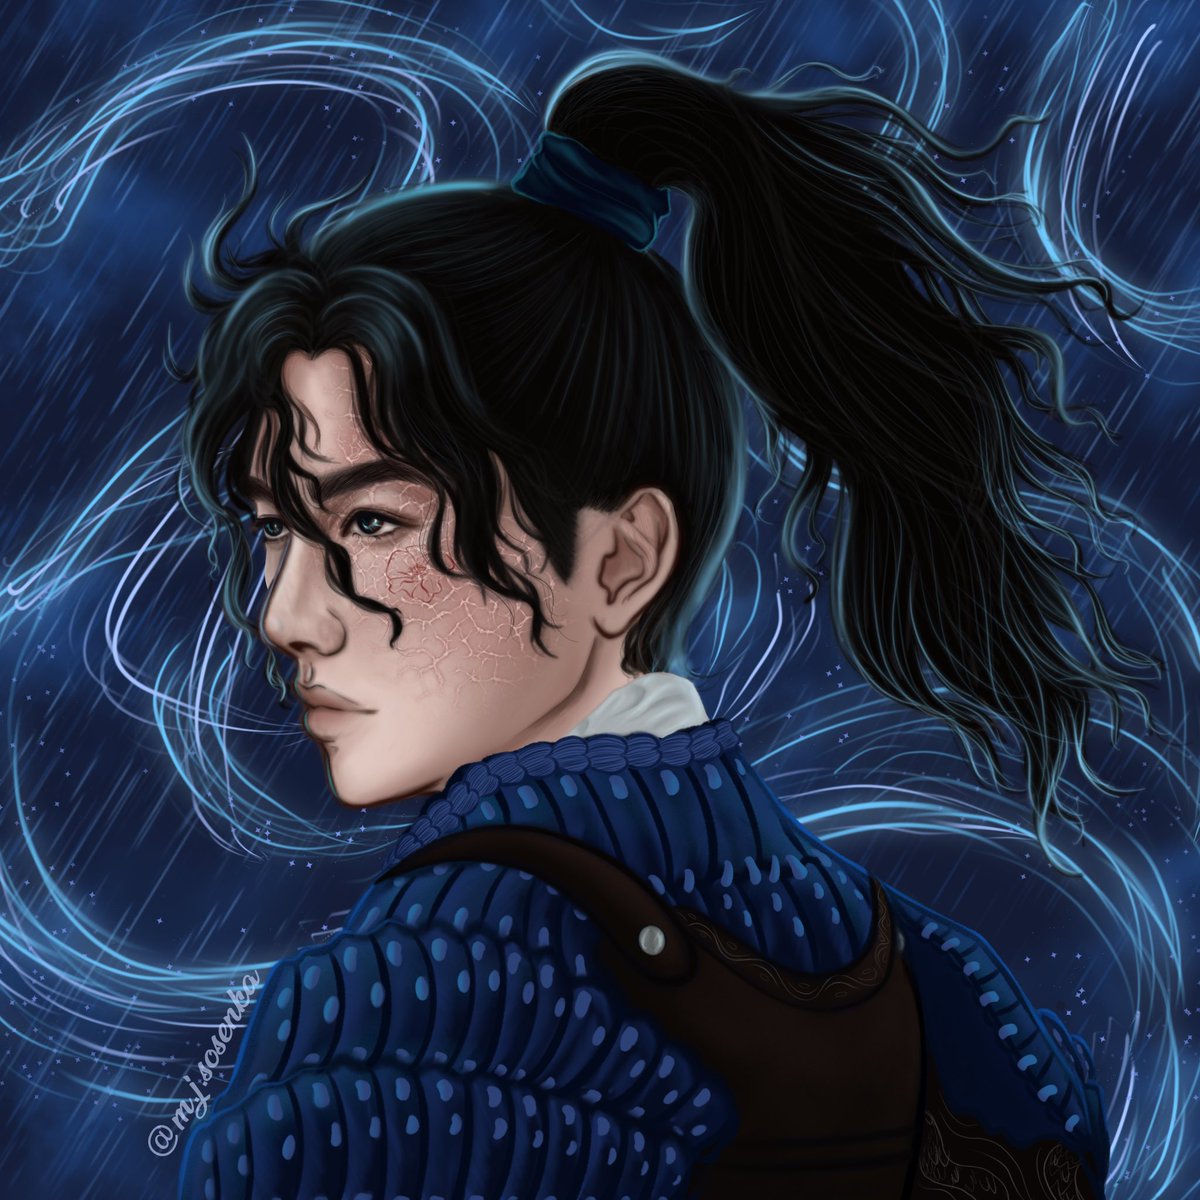 Yin Nezha 🐉✨

I hope you all will like my version of Nezha 🤗 Next time I will try even more harder to do him justice 😤 

This was good emotional damage that I will never forget 💙

#thepoppywar #bookstagrampl #book #bookfanart #fanart #art #artwork #illustration @kuangrf